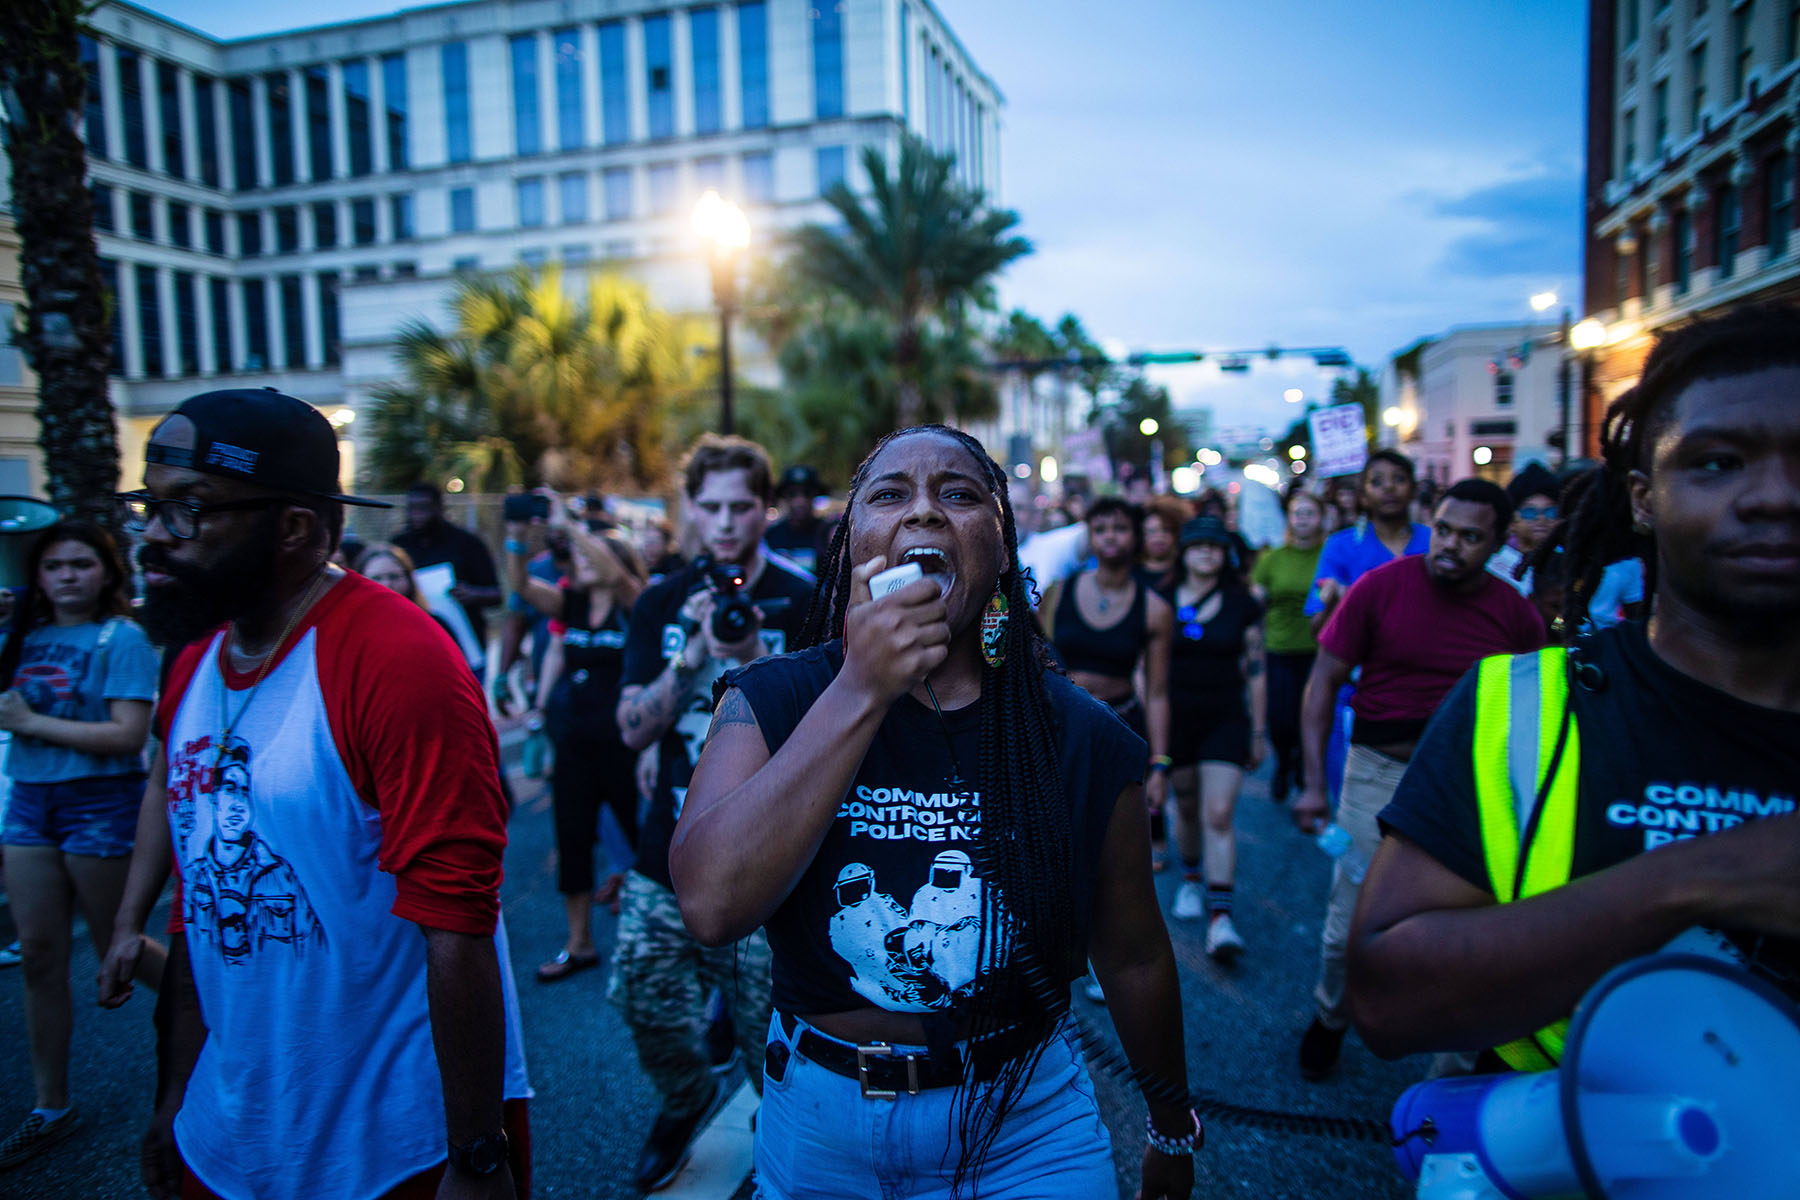 A woman chants slogan into a megaphone as people march to honor the victims of a deadly shooting in Jacksonville, Florida.